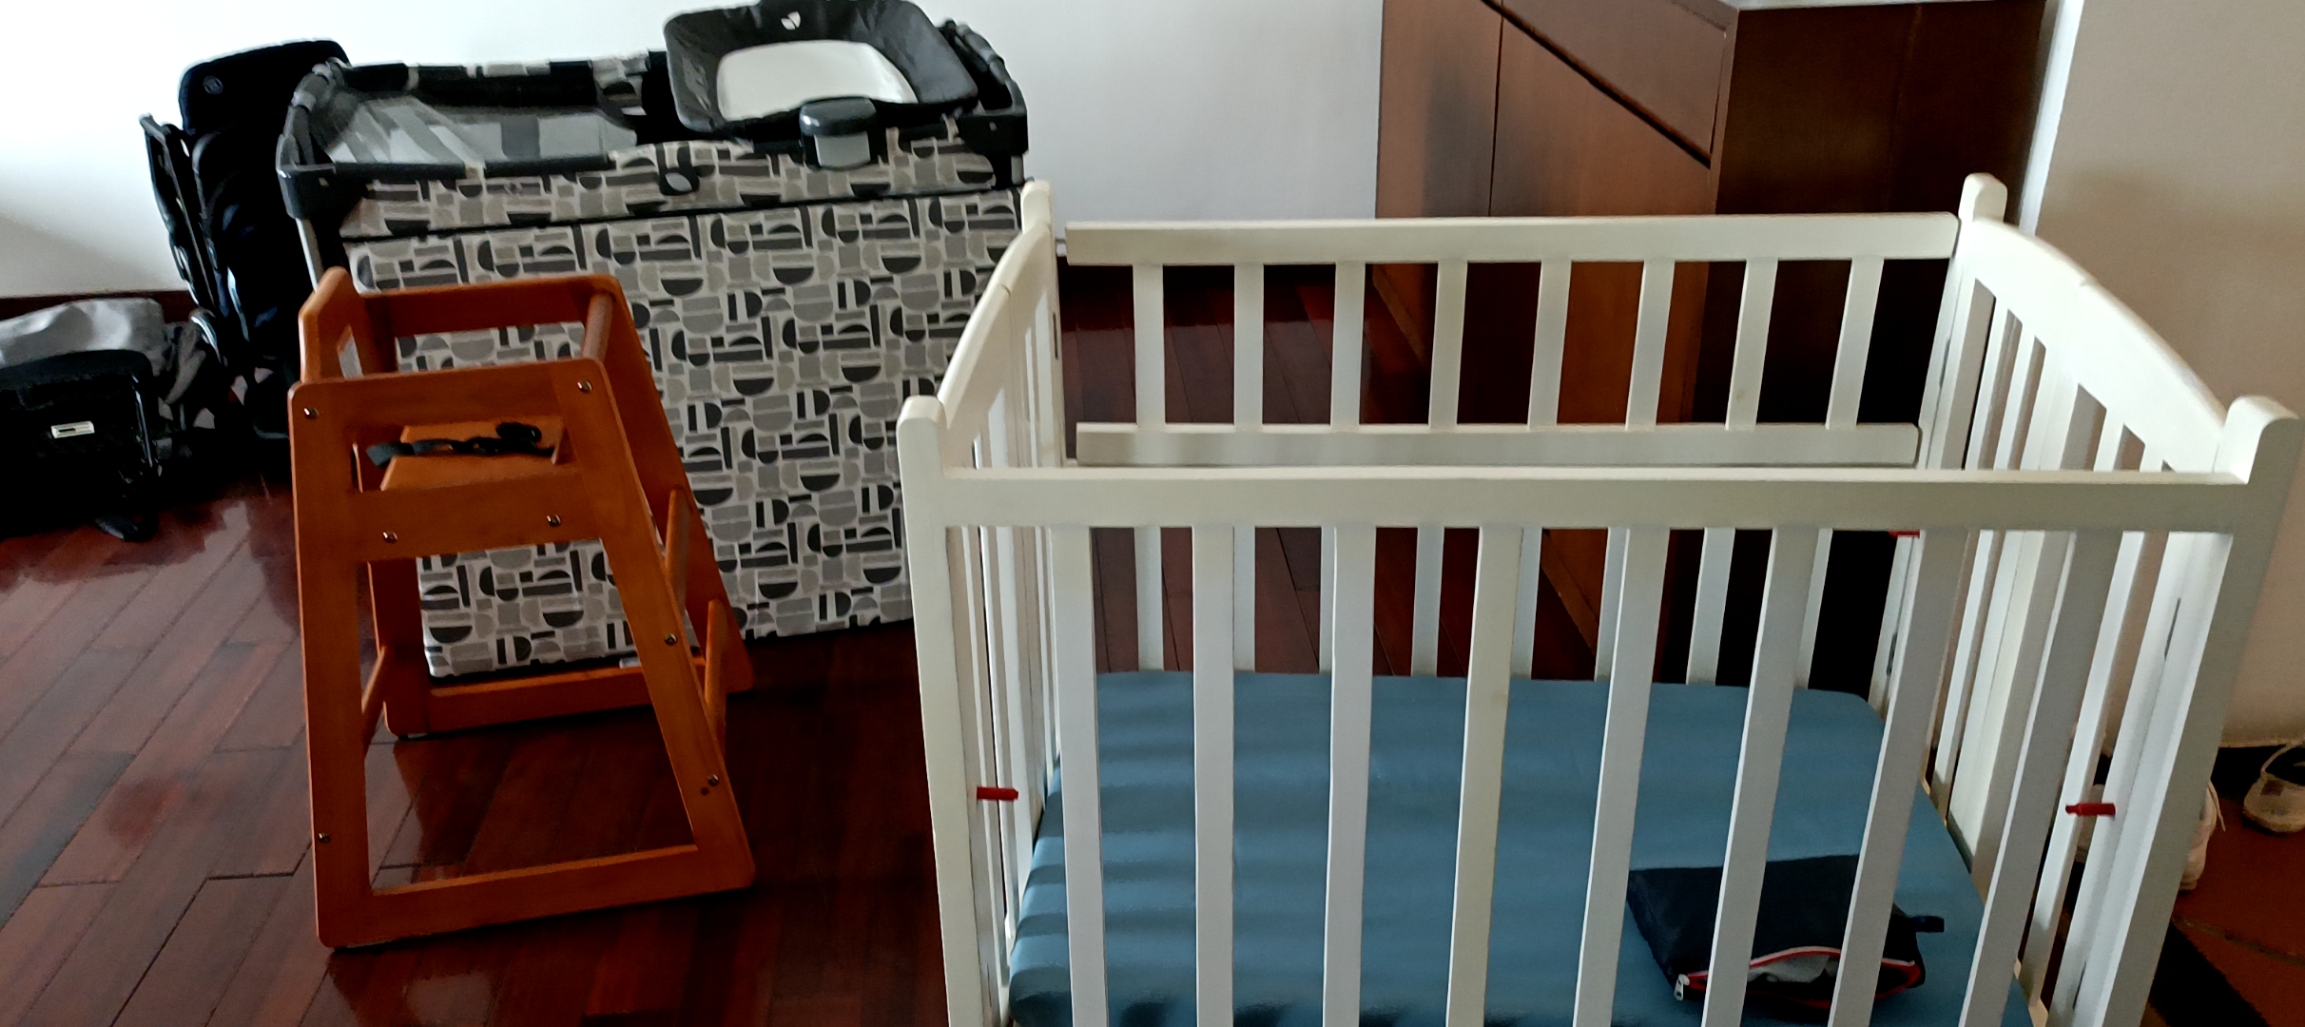 Rental of baby items